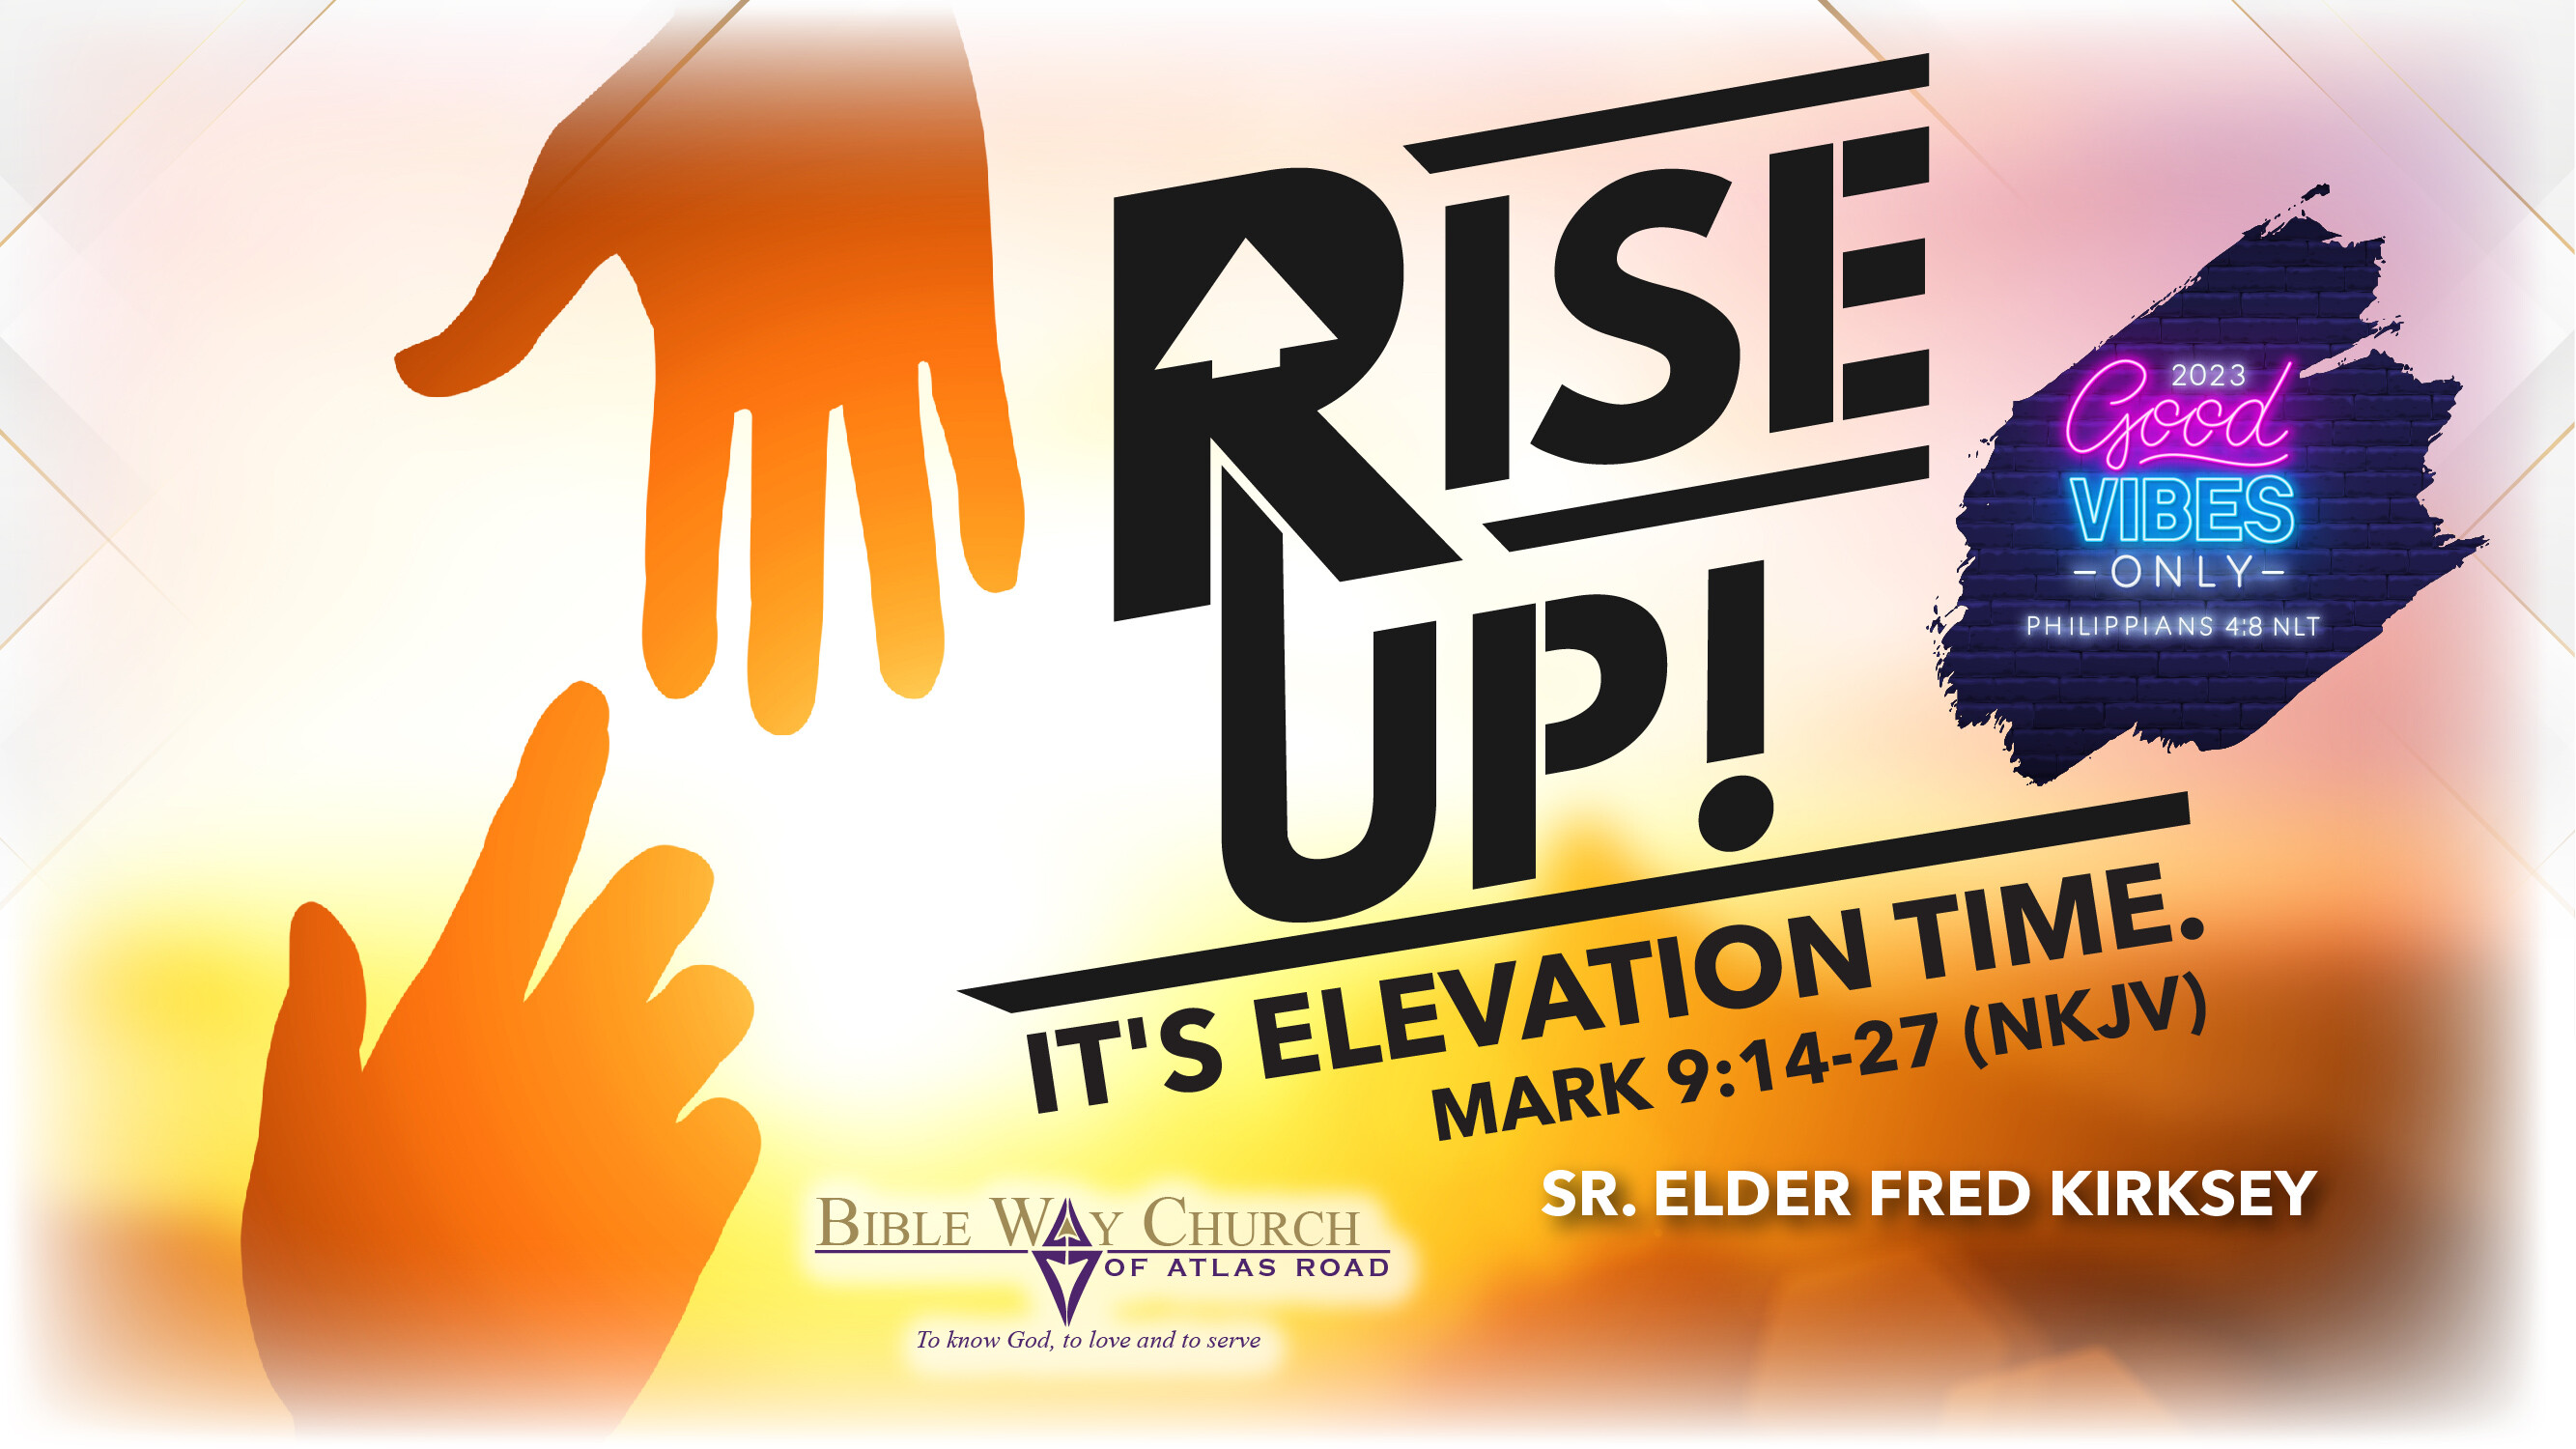 RISE UP! It's Elevation Time.